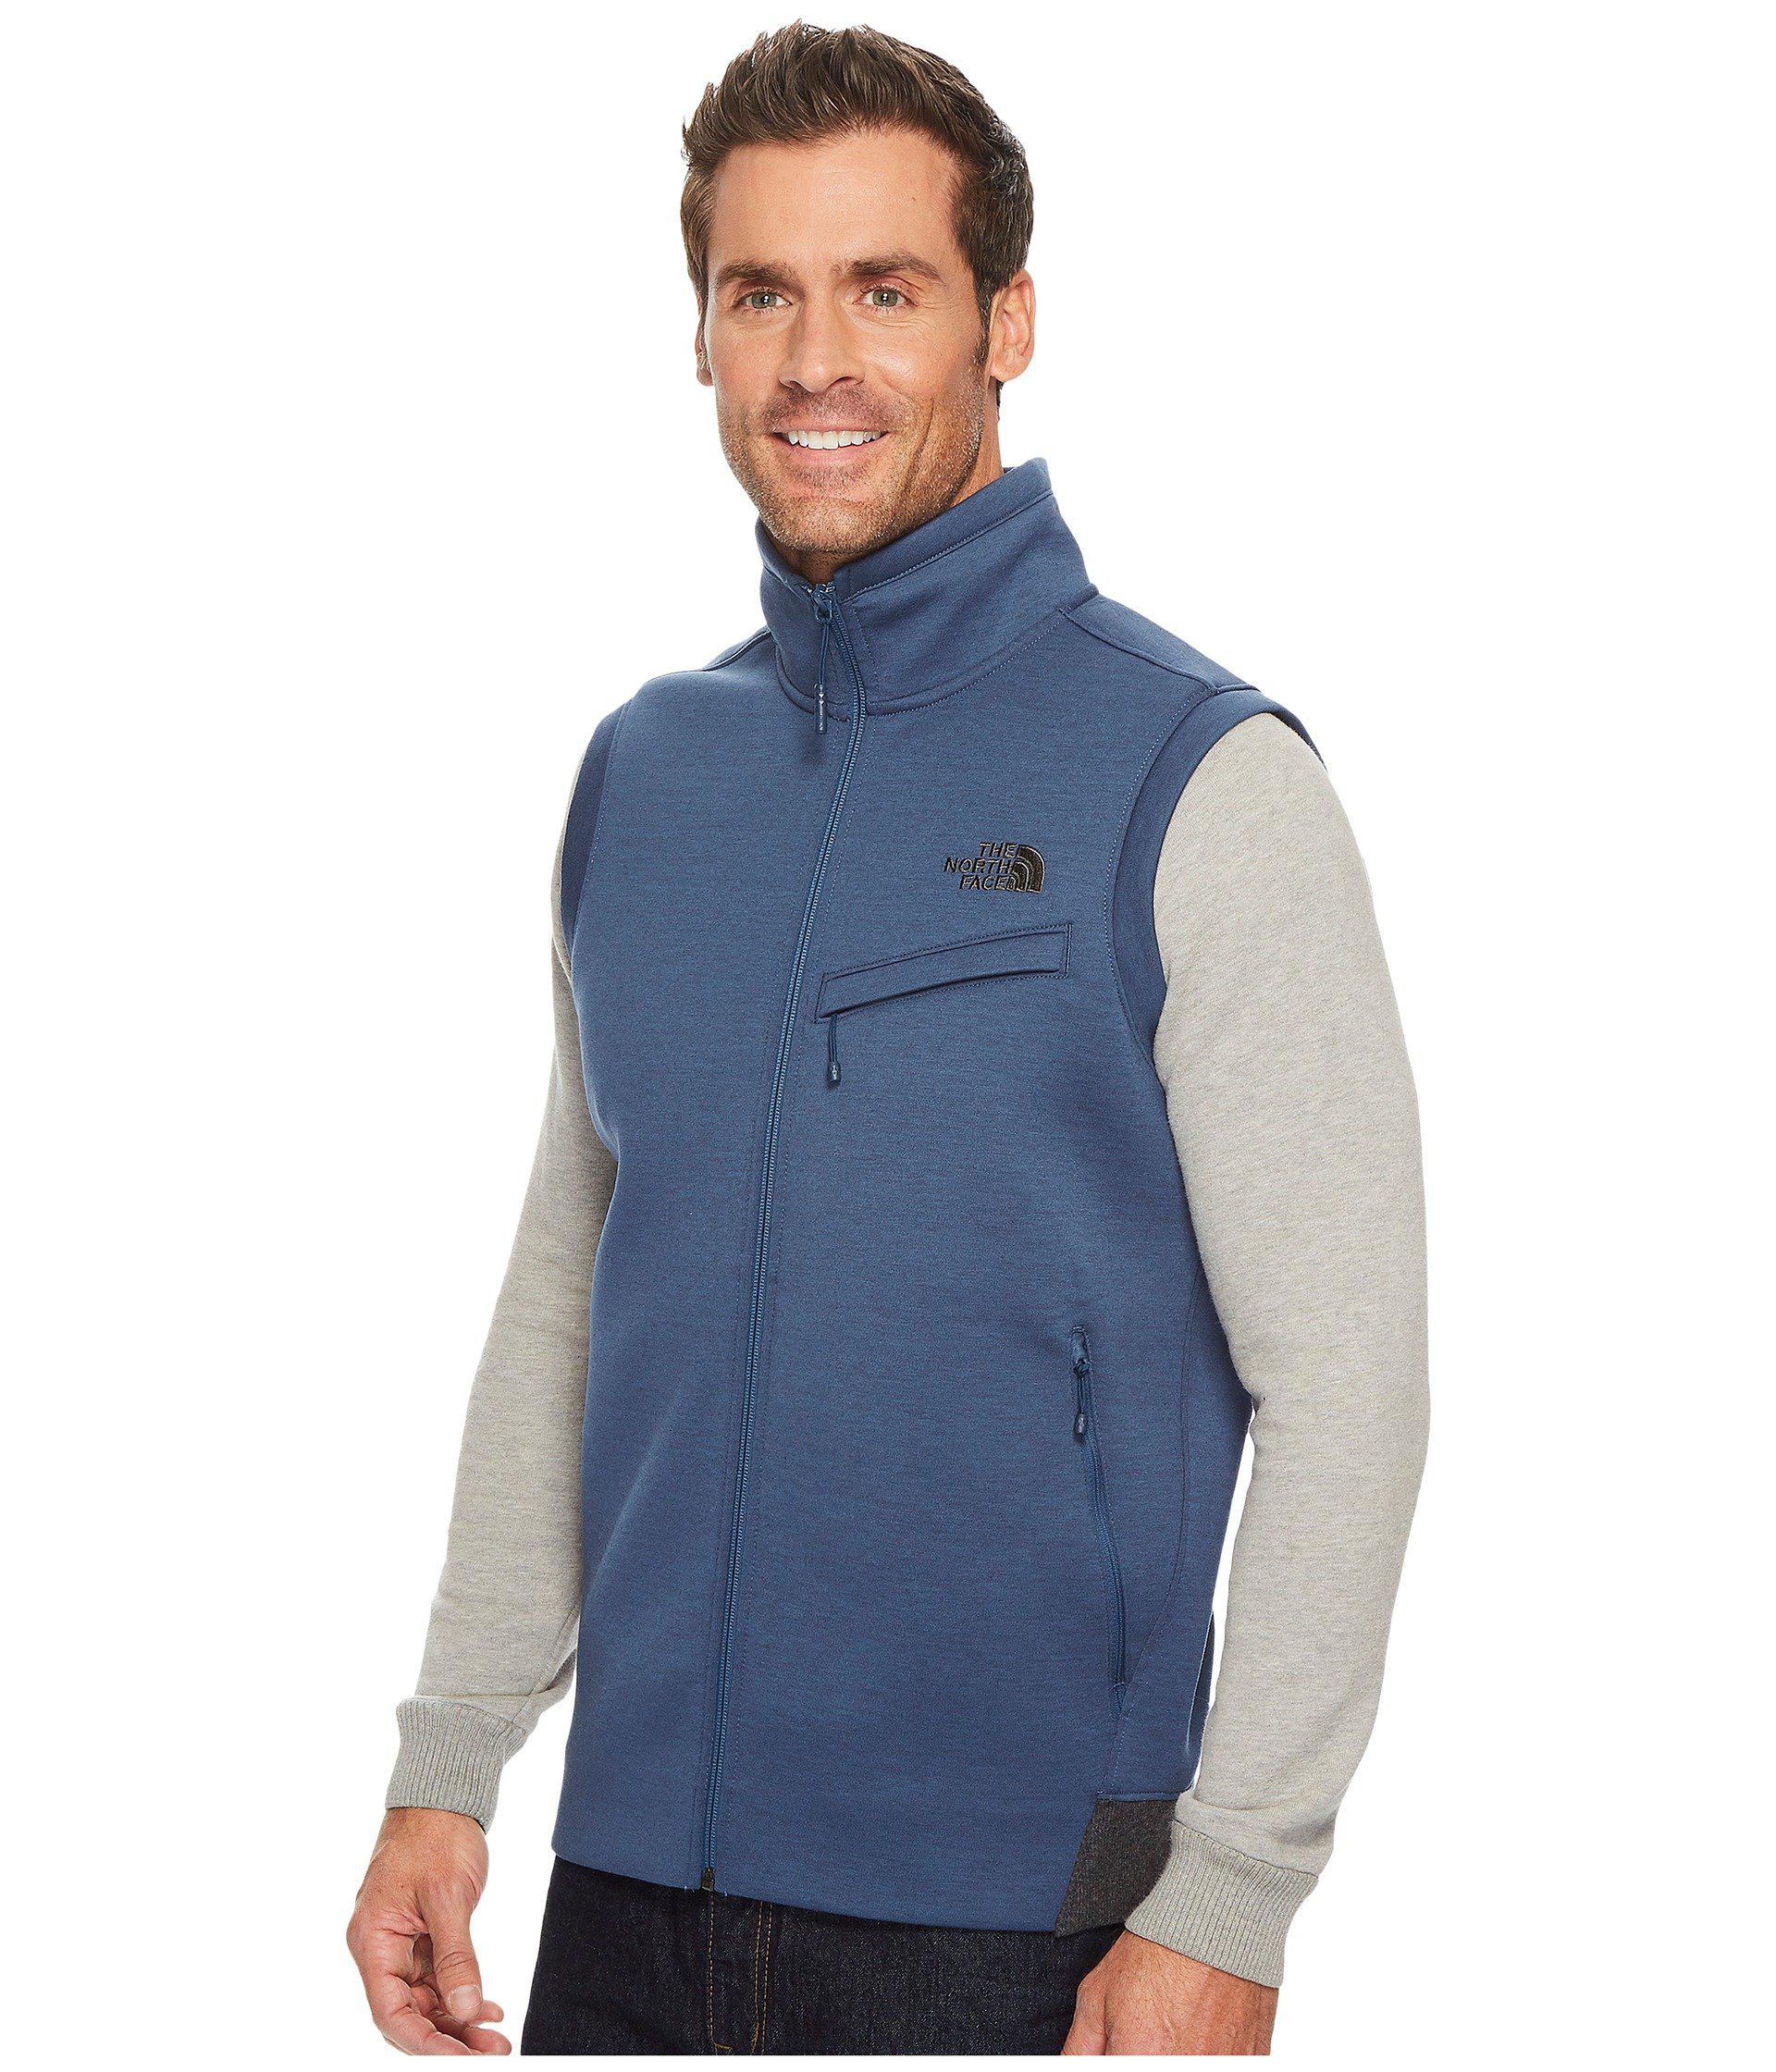 North Face Thermal Vest Online Sale, UP TO 70% OFF